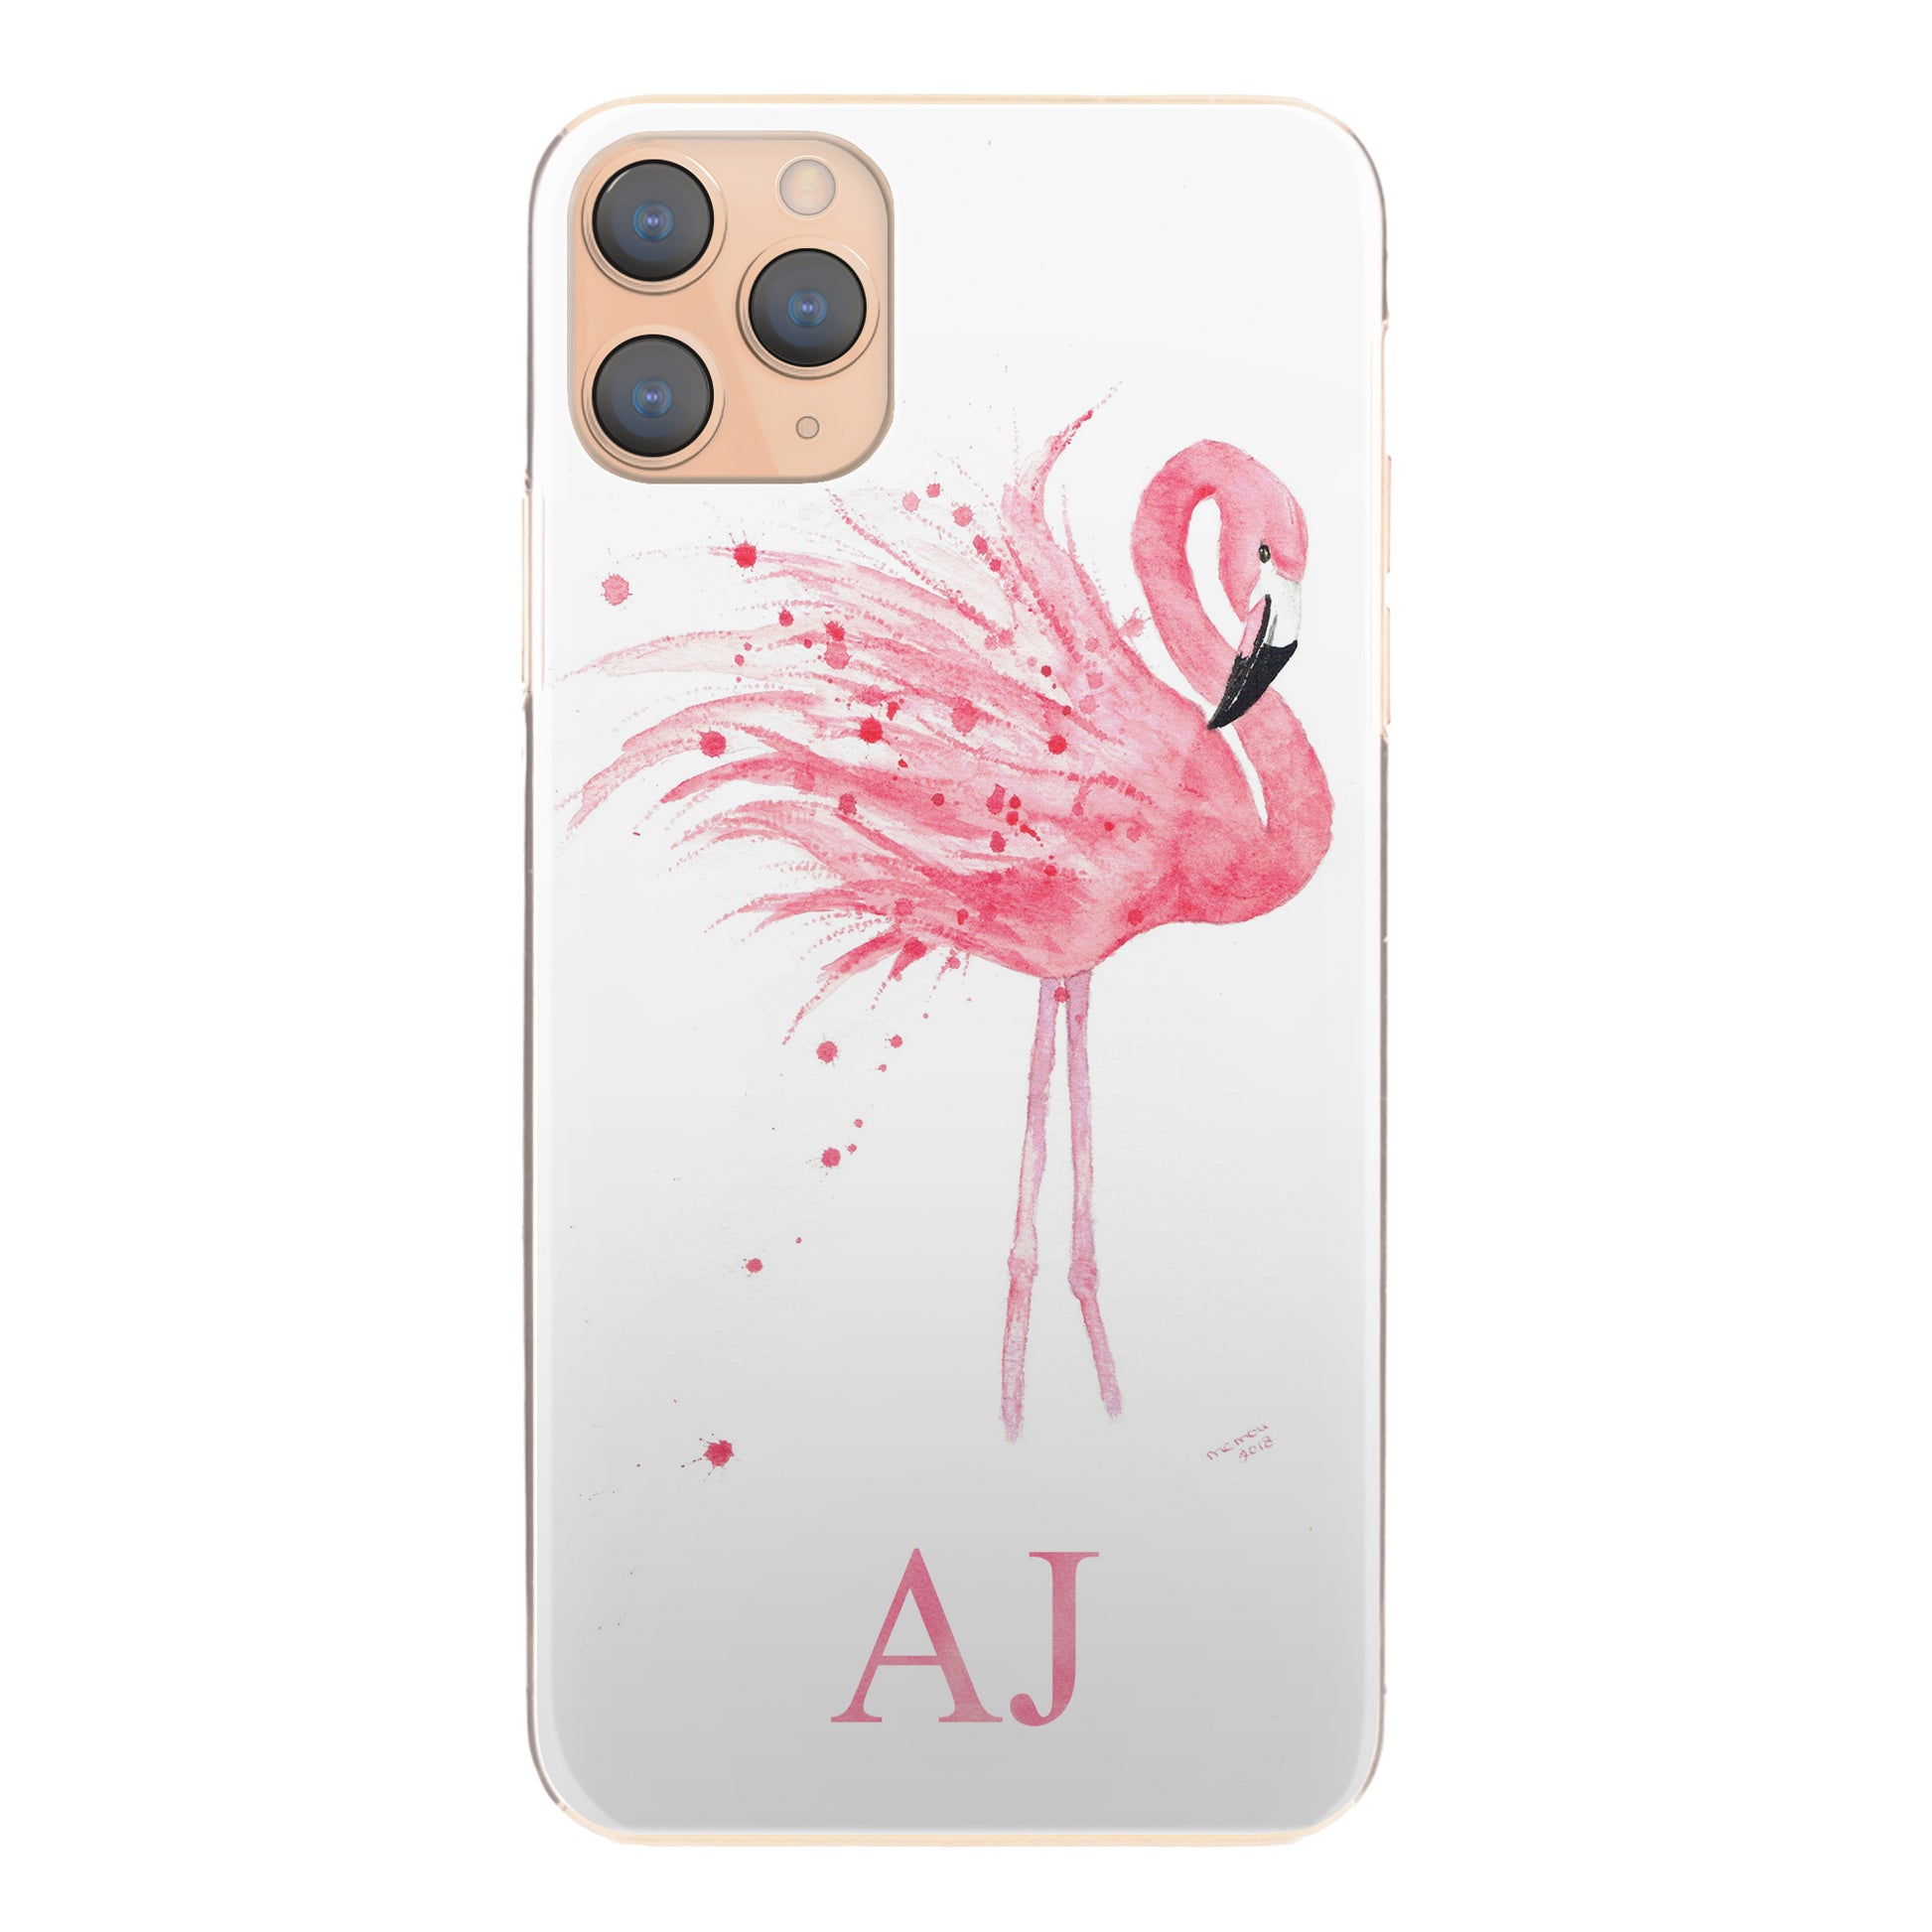 Personalised Nokia Phone Hard Case with Speckled Flamingo and Pink Initials